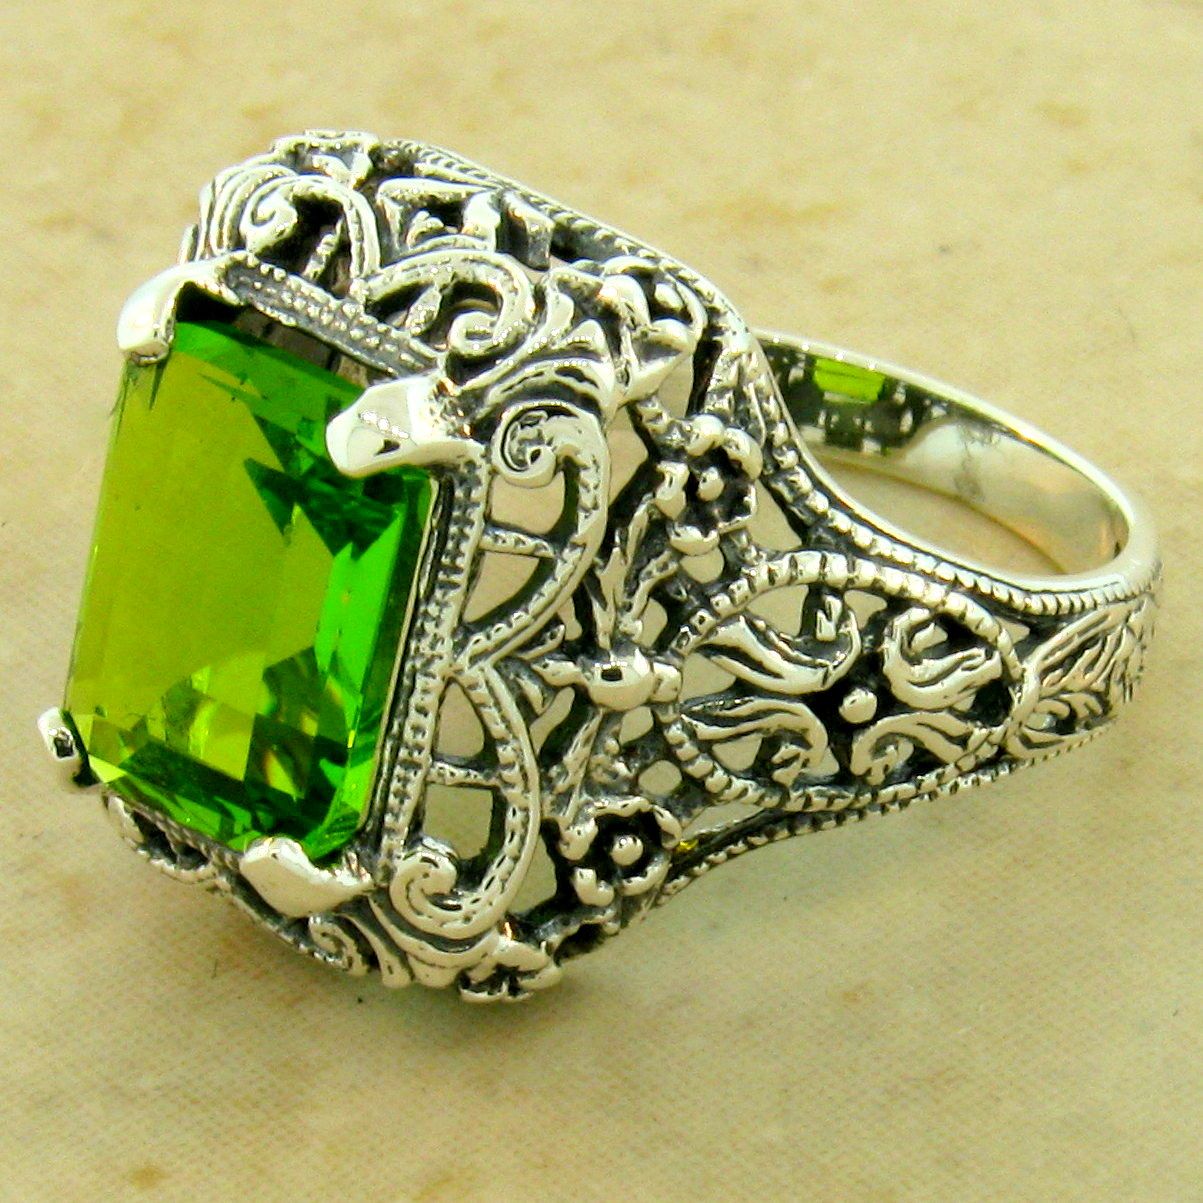 2.6 CT SIM PERIDOT 925 STERLING SILVER ANTIQUE FILIGREE STYLE RING #1125